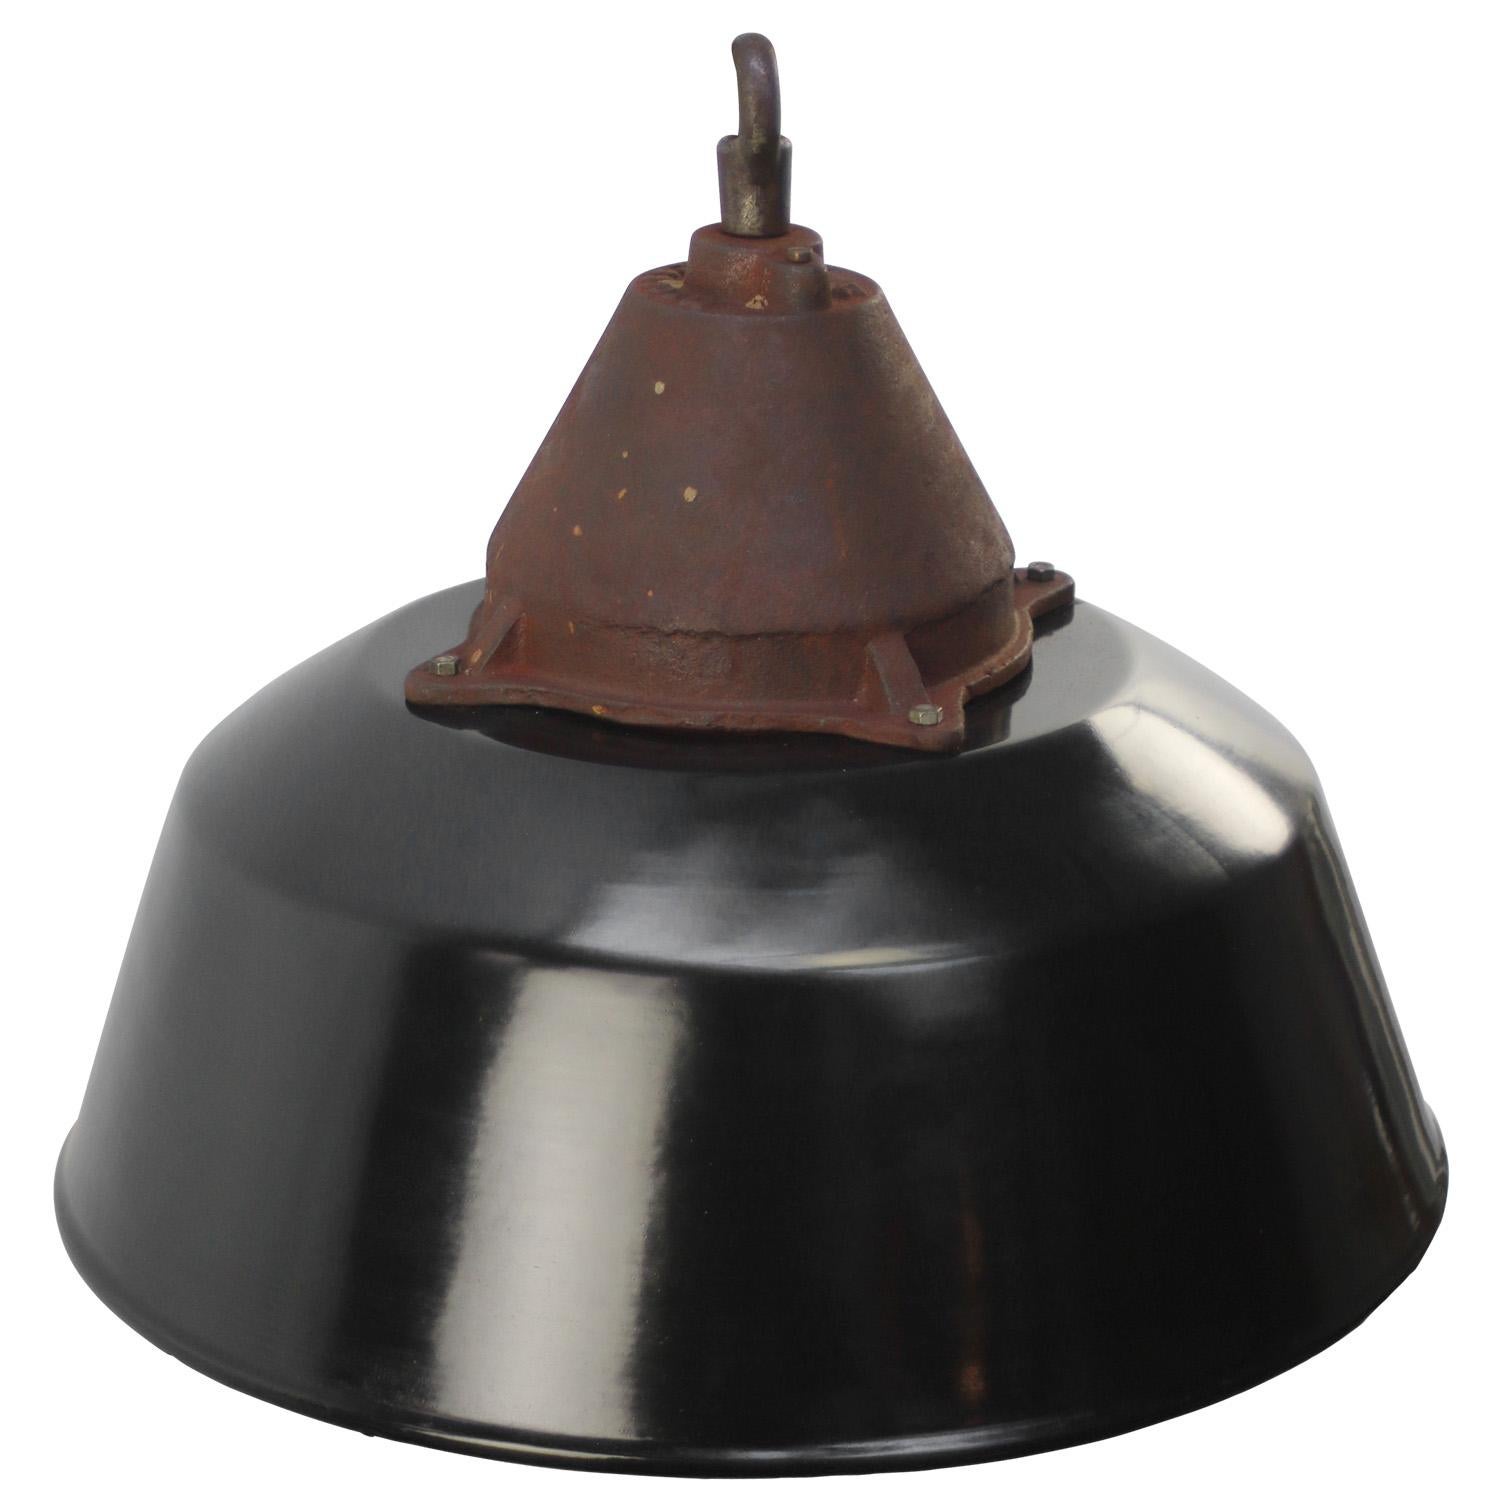 Factory hanging lamp. Black enamel. White interior.
Clear glass. Cast iron top.

Weight 5.5 kg / 12.1 lb

Priced per individual item. All lamps have been made suitable by international standards for incandescent light bulbs, energy-efficient and LED